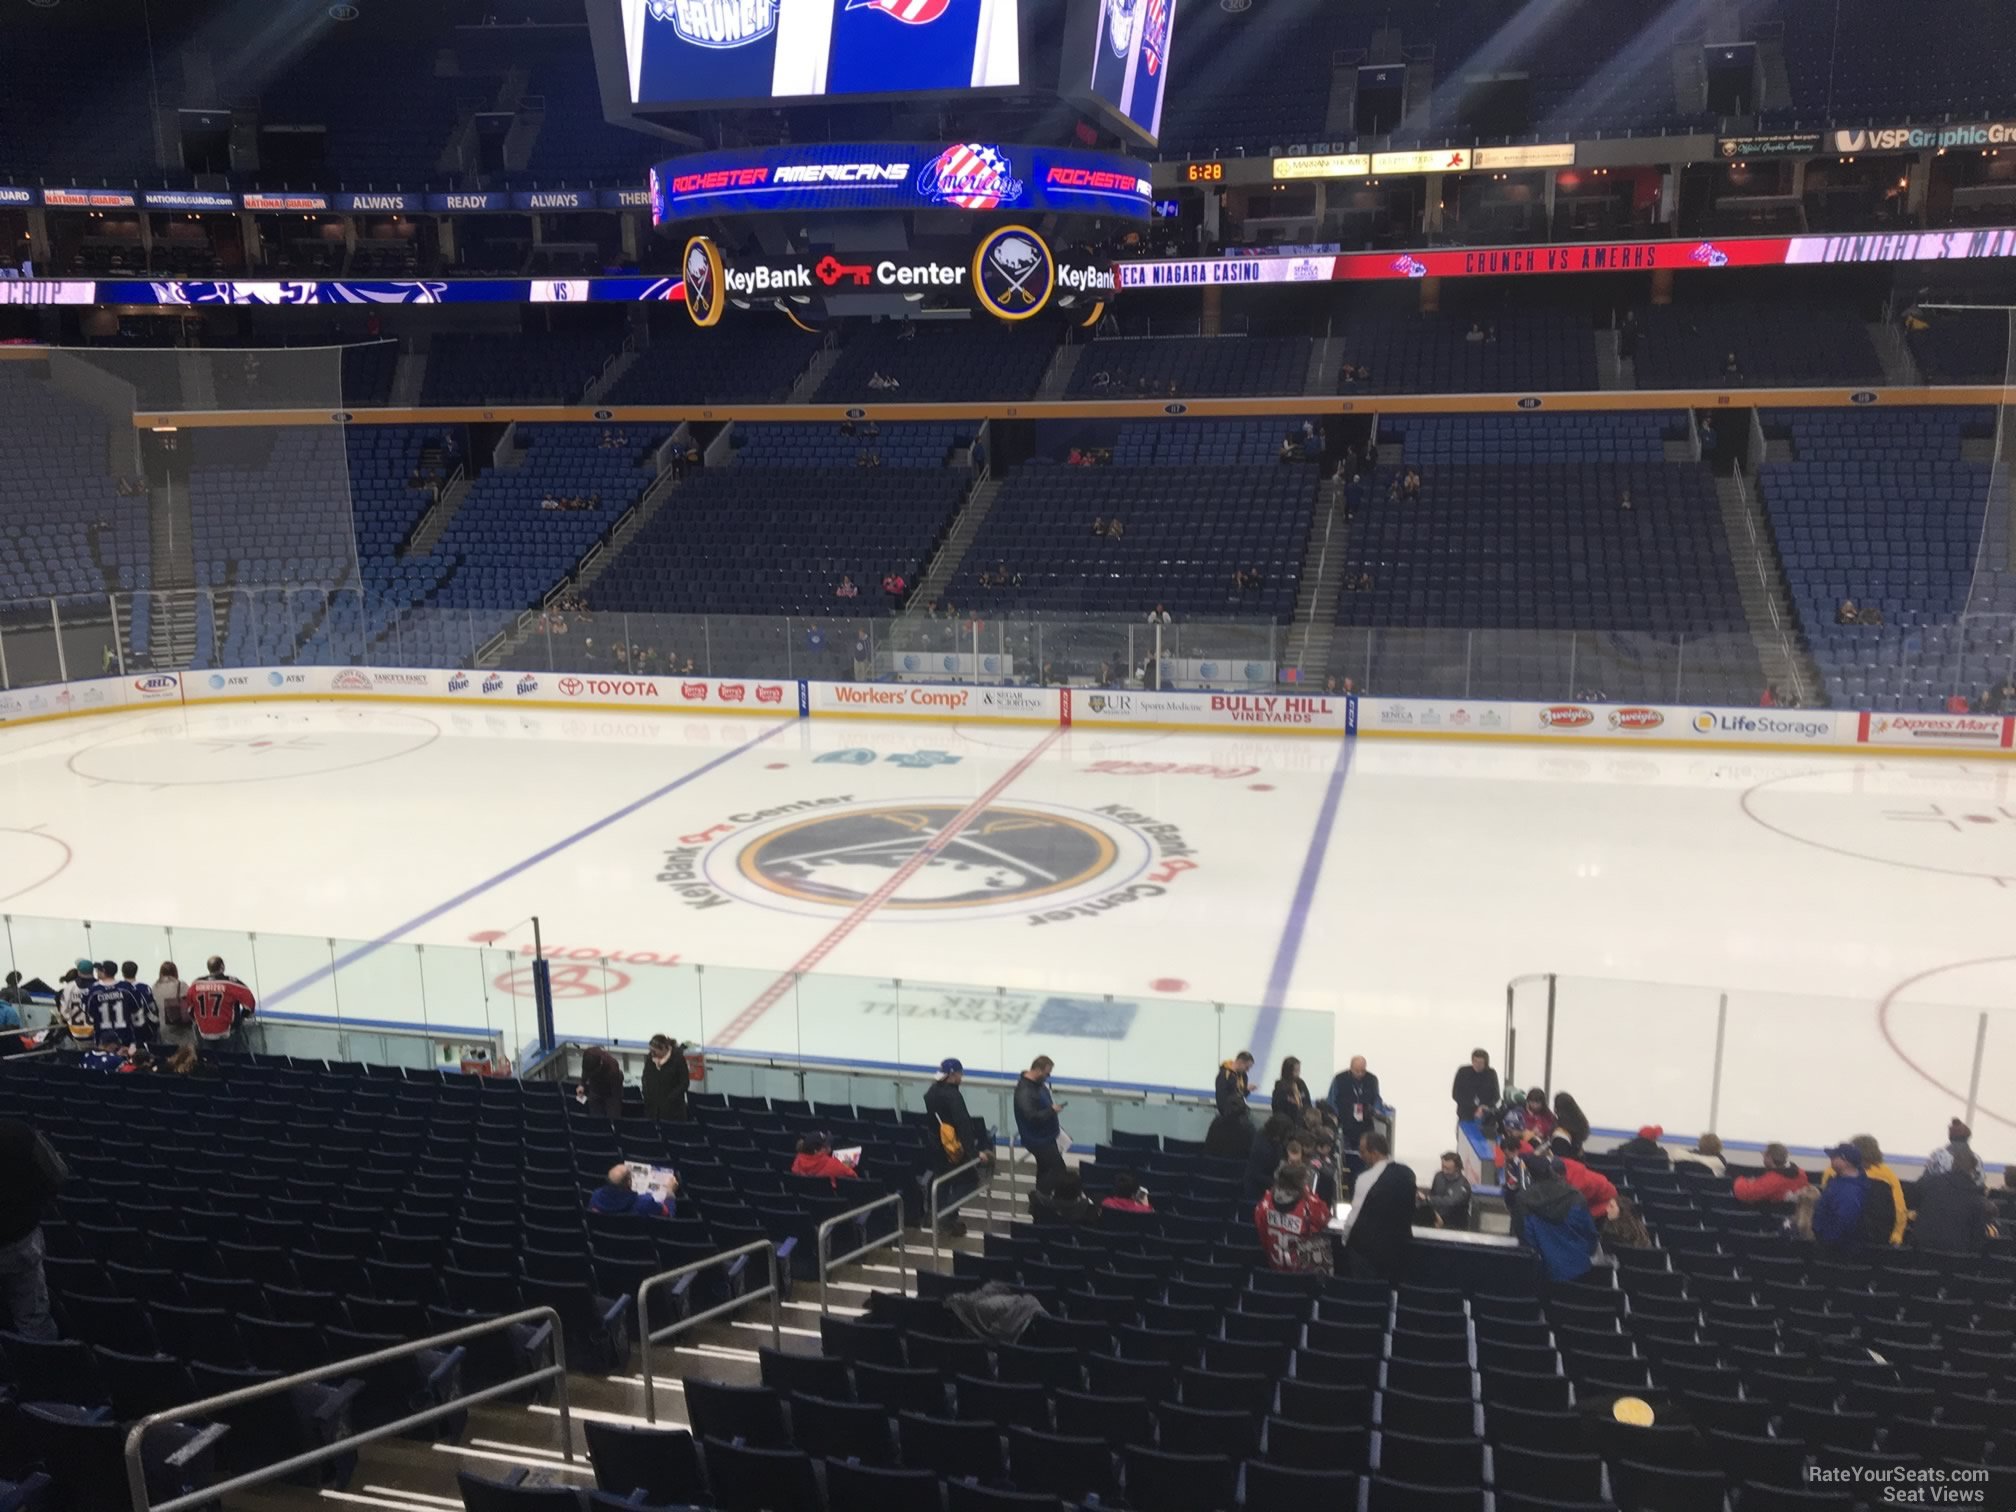 section 206, row 4 seat view  for hockey - keybank center